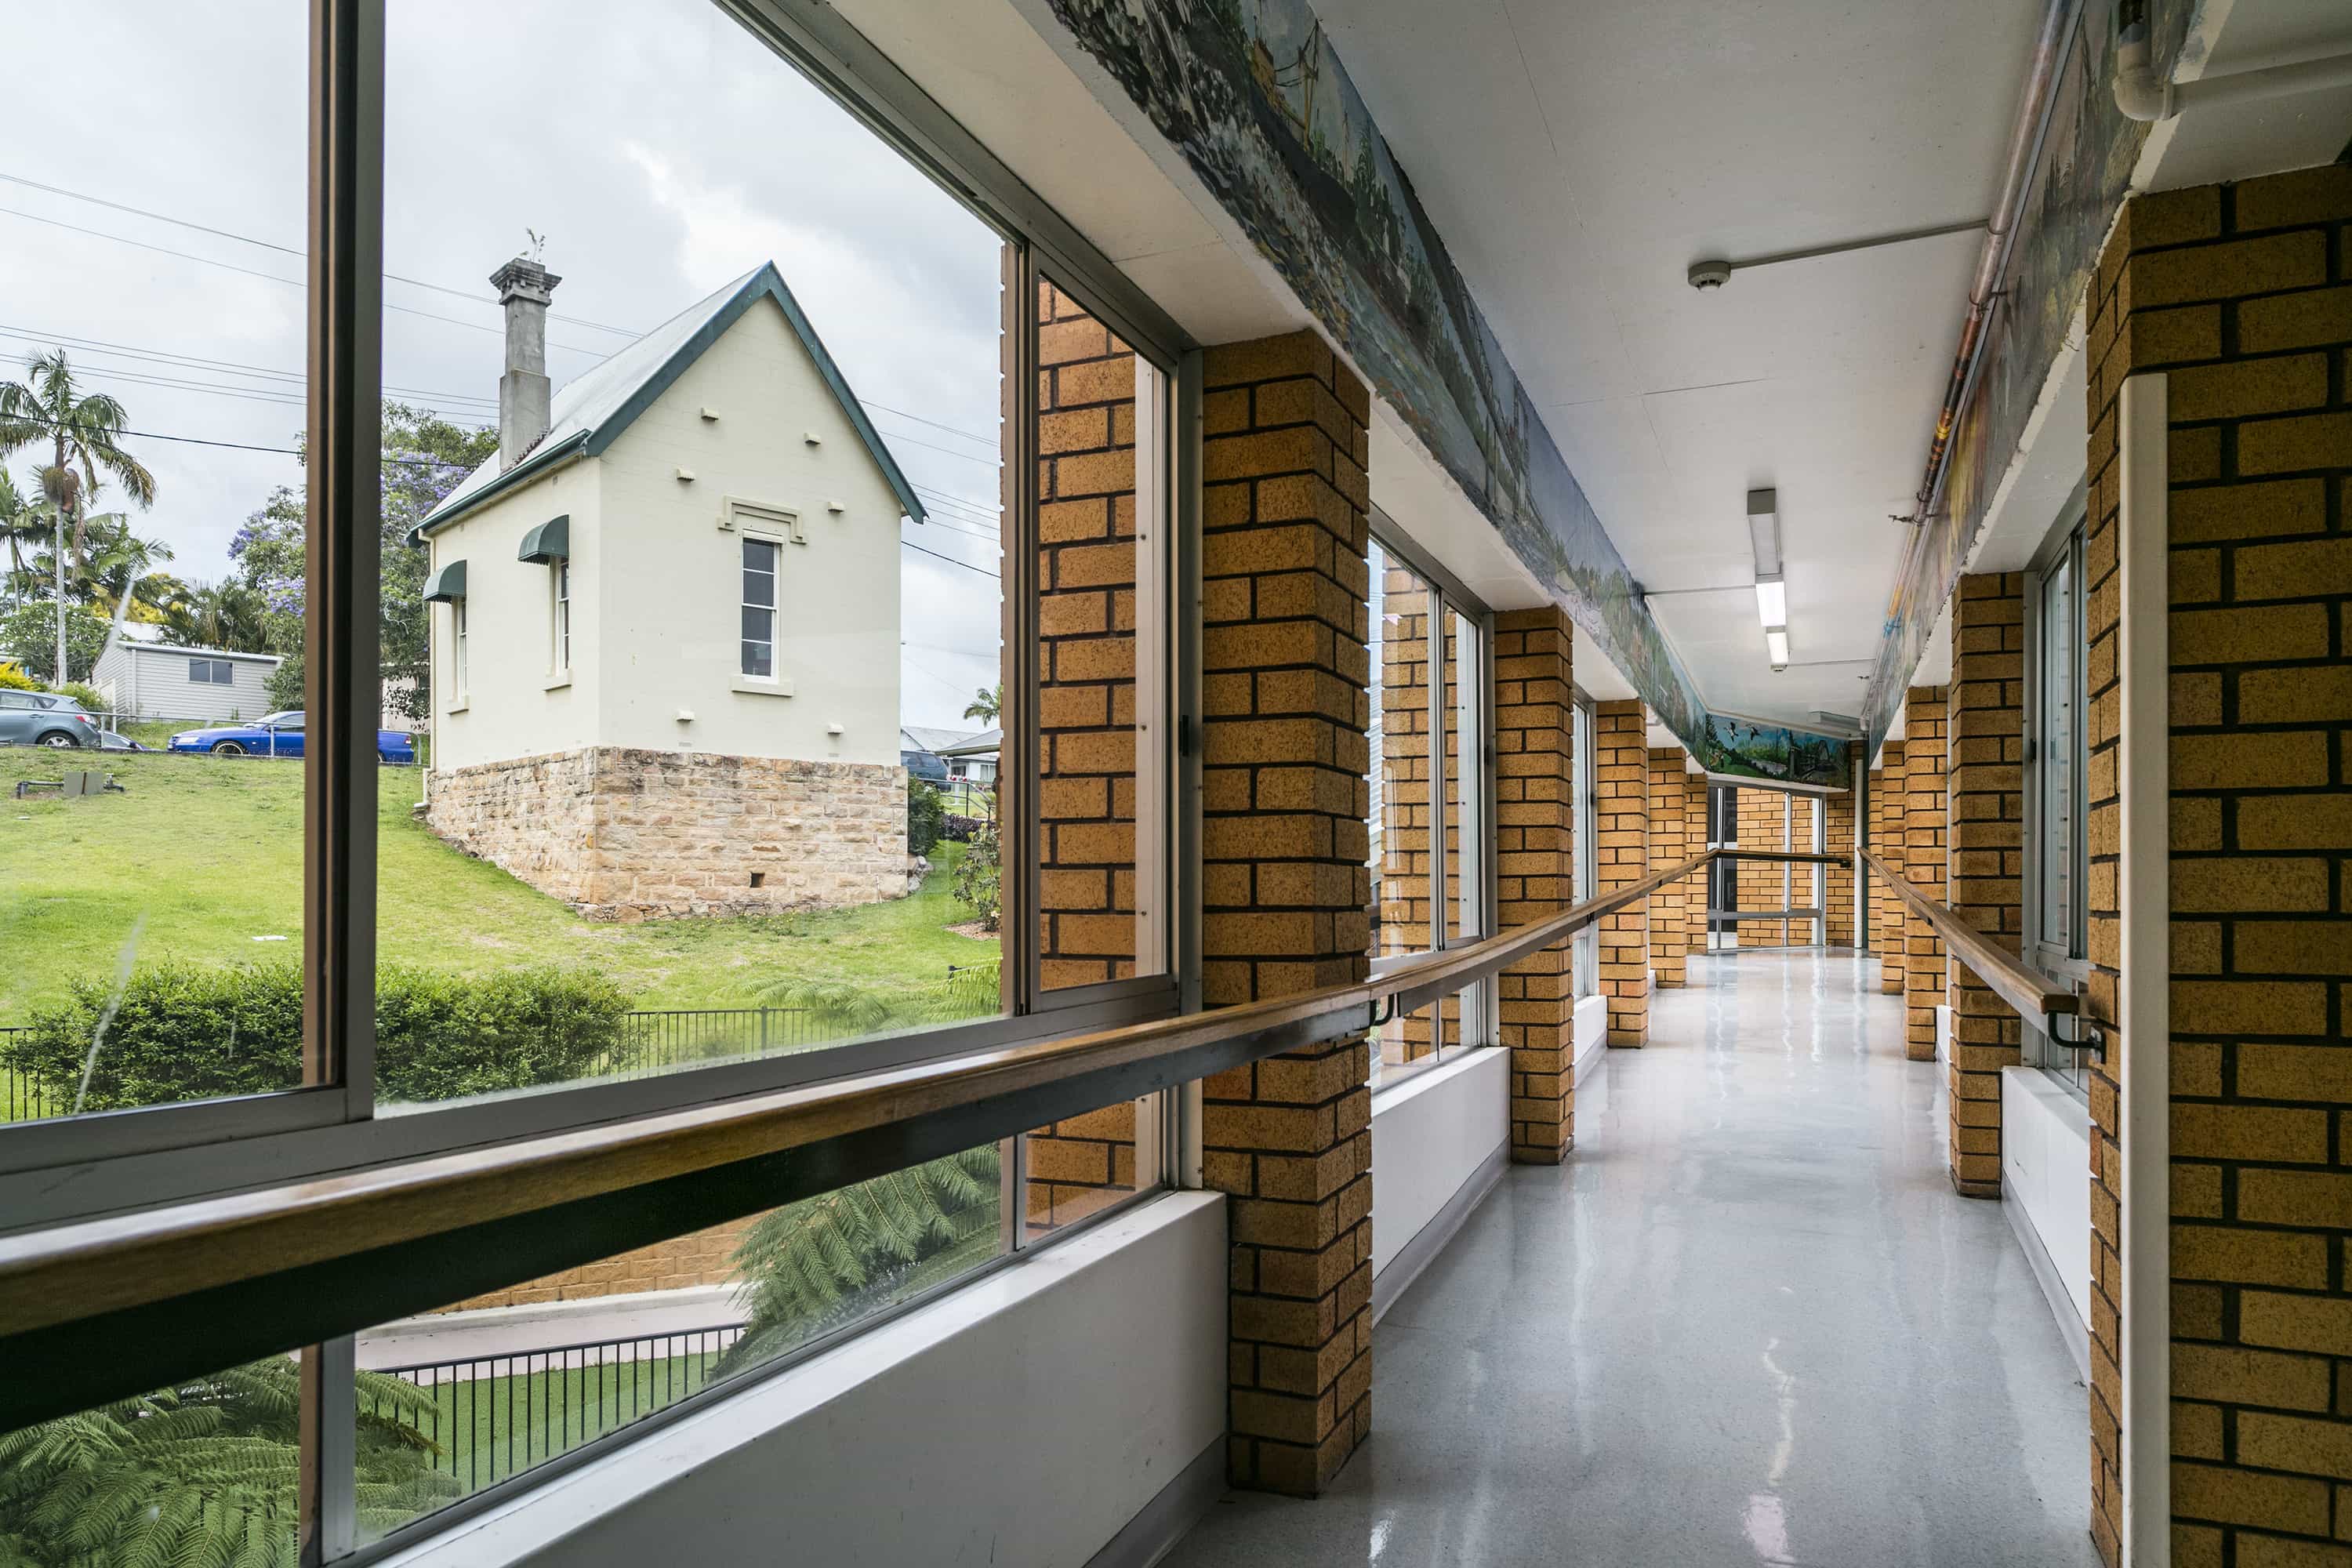 The corridors of Whiddon Maclean's residential care home, filled with natural light which seeps through the windows.